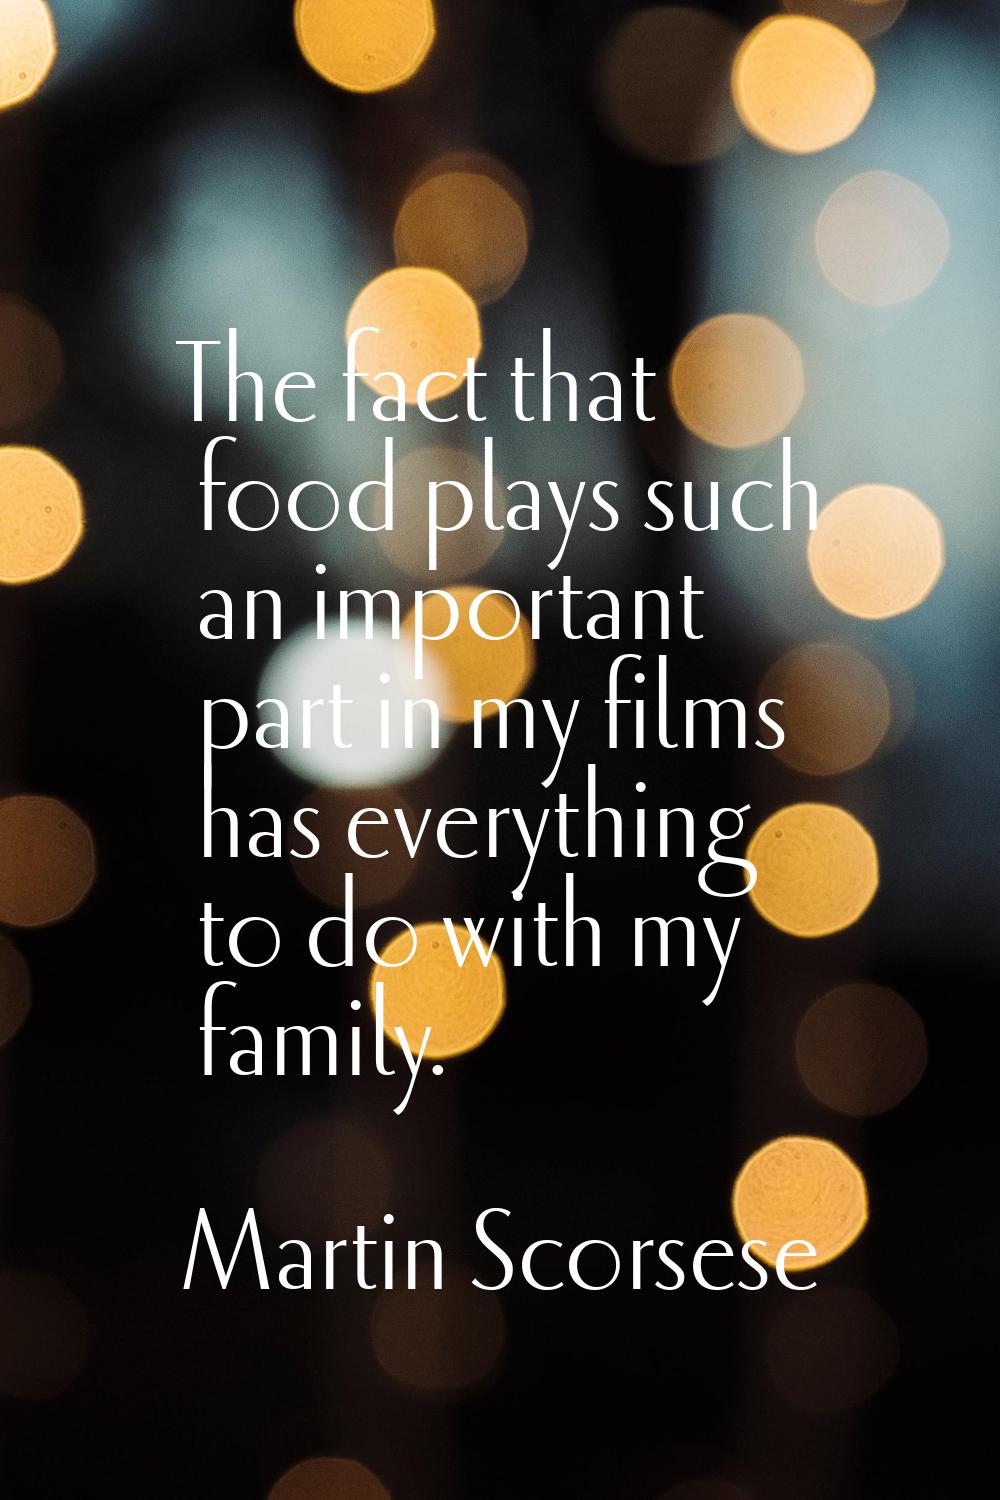 The fact that food plays such an important part in my films has everything to do with my family.